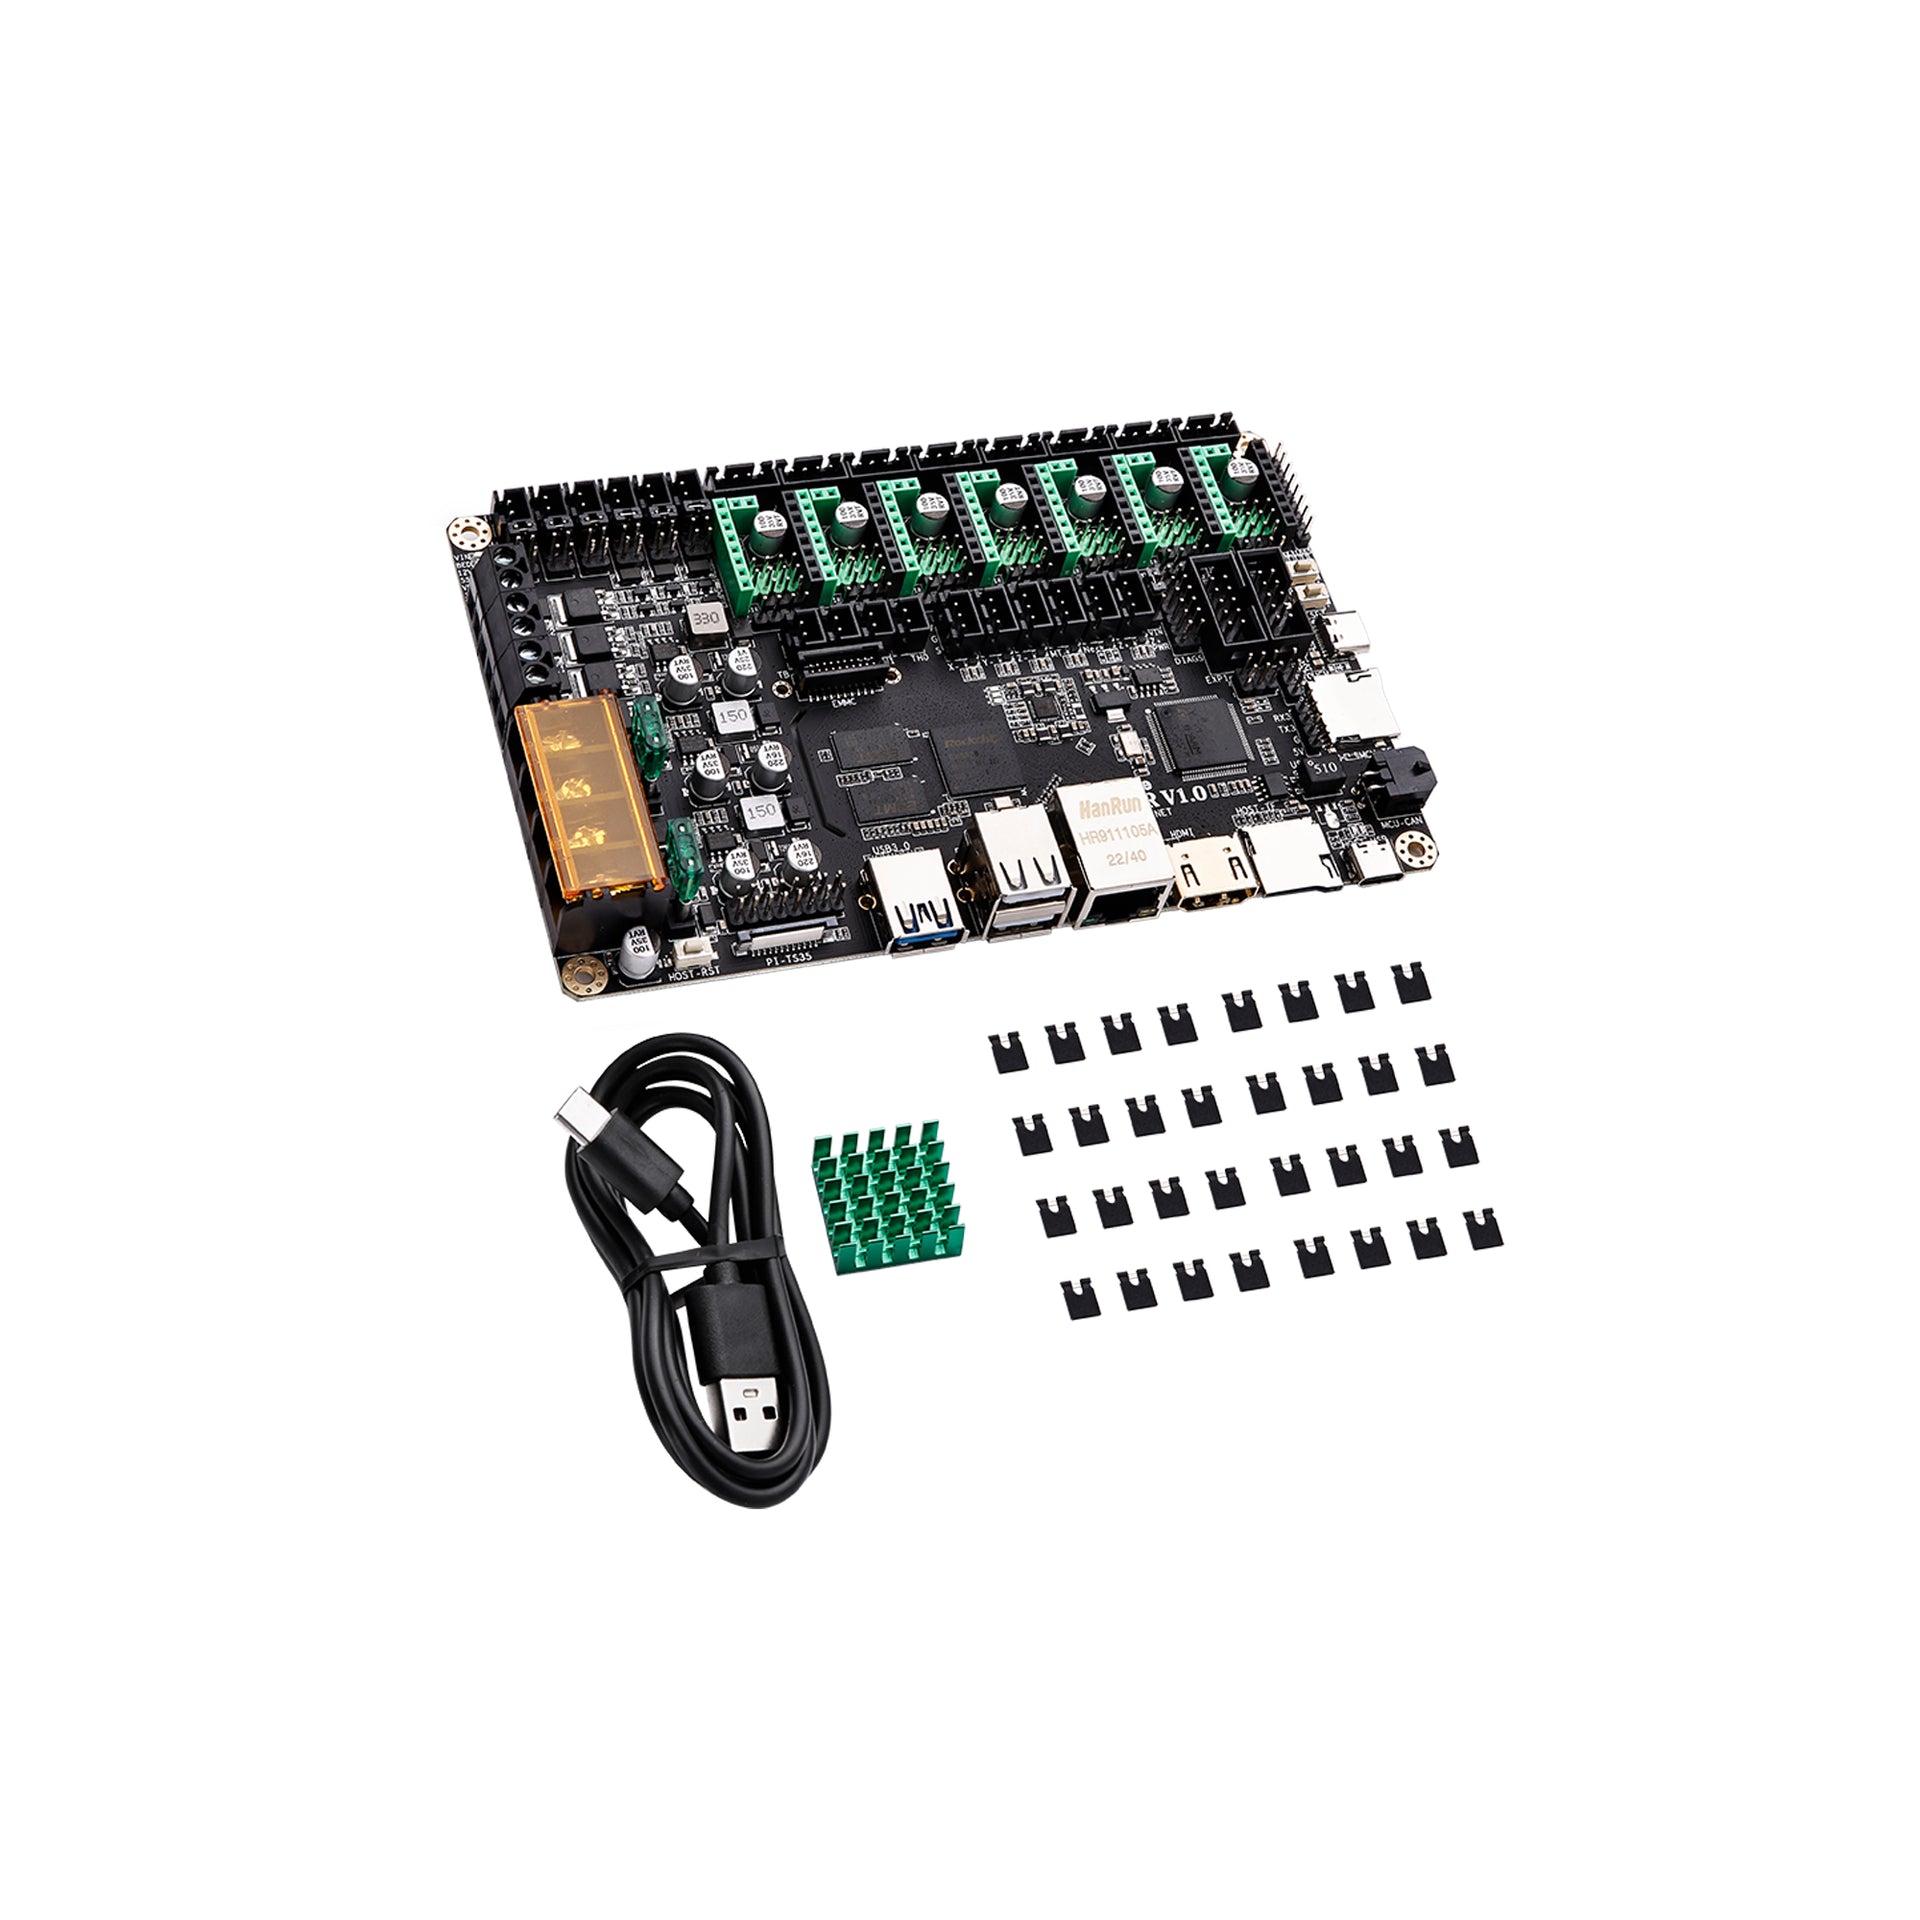 kortademigheid Verlichting Abnormaal MKS SKIPR V1.0]All-in-one board for Klipper Firmware, Configurable fo –  Makerbase